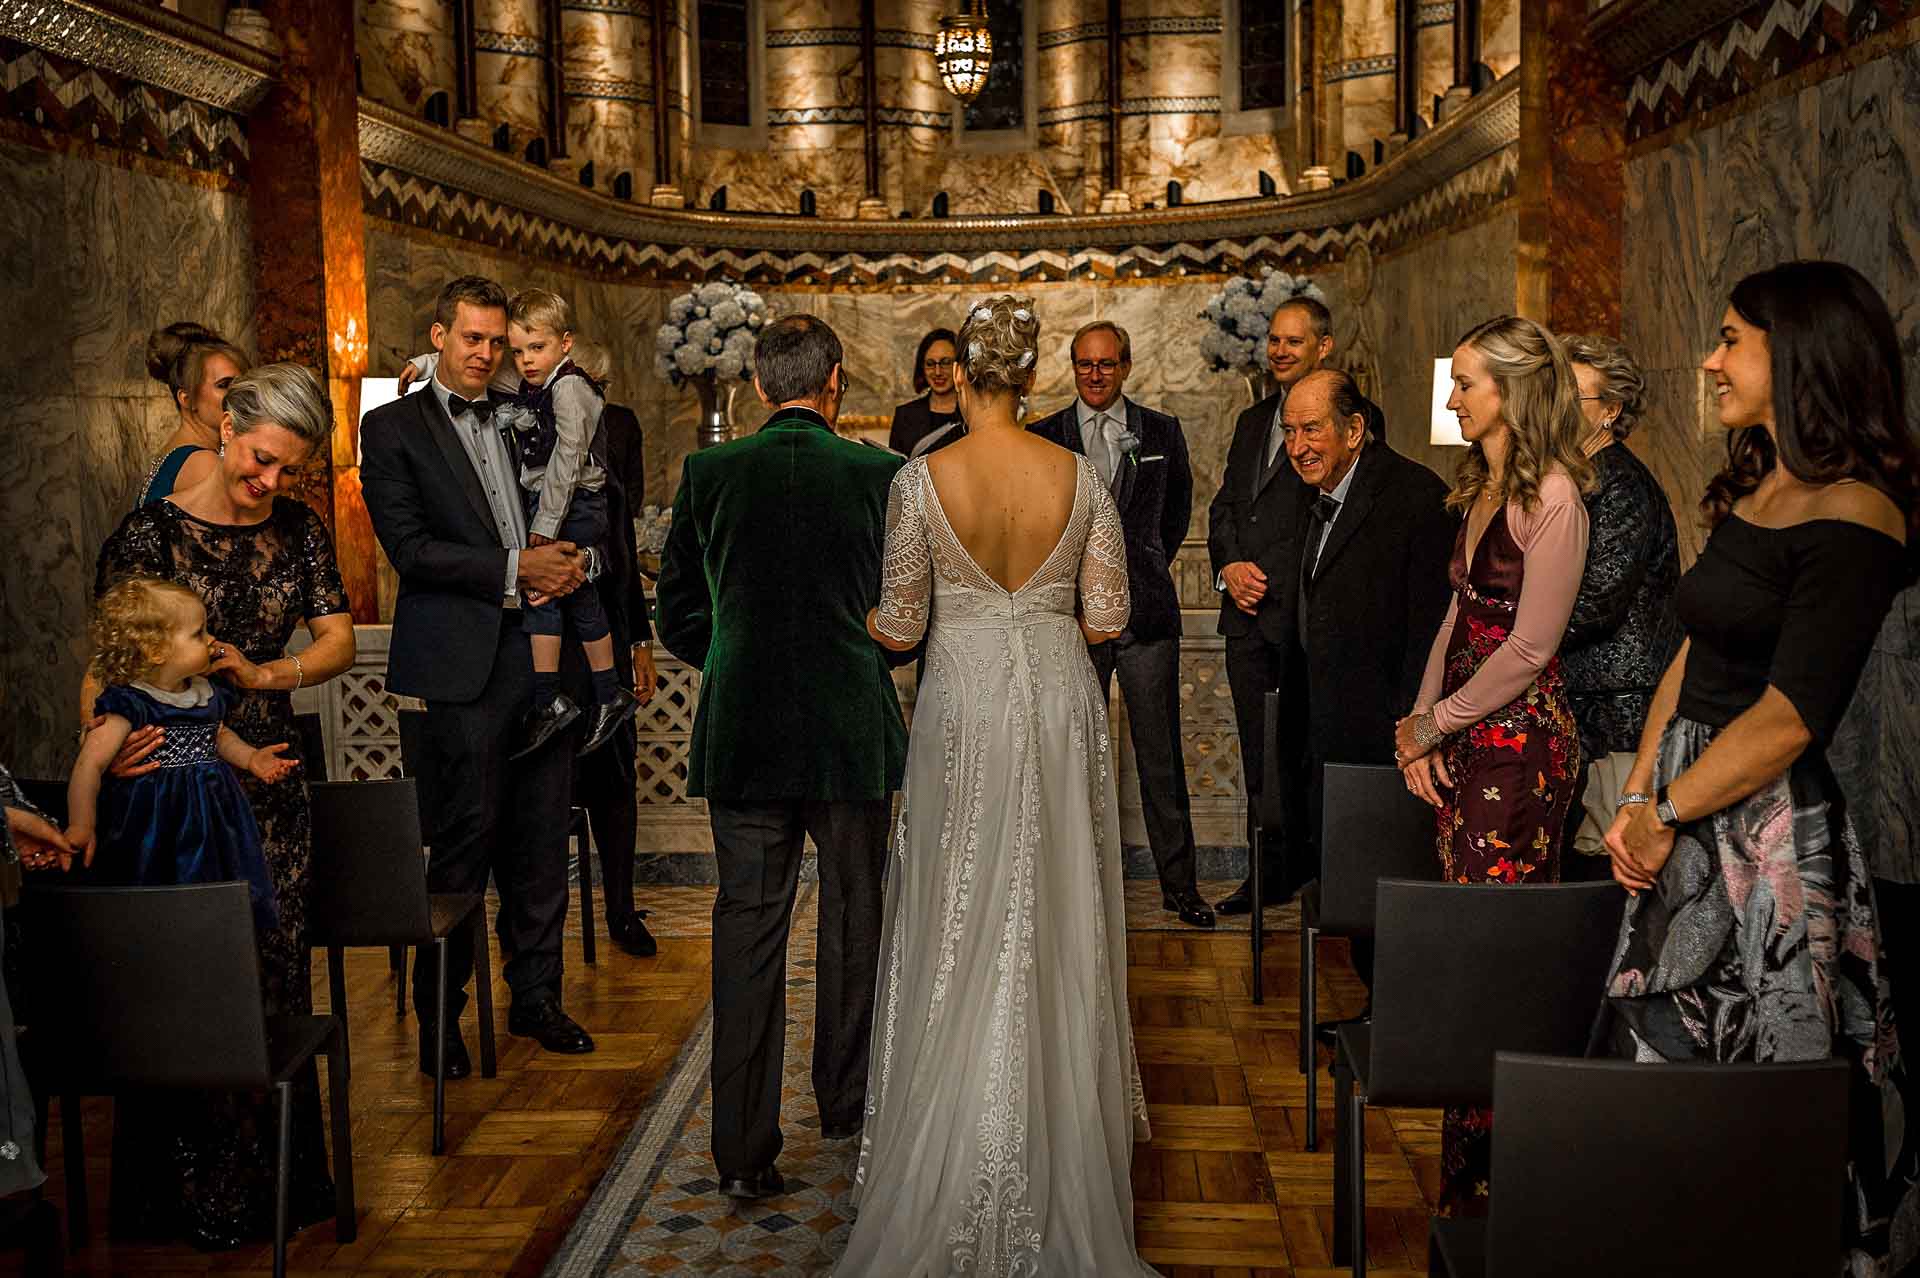 The bride's father escorts her down the aisle at the Fitzrovia Chapel